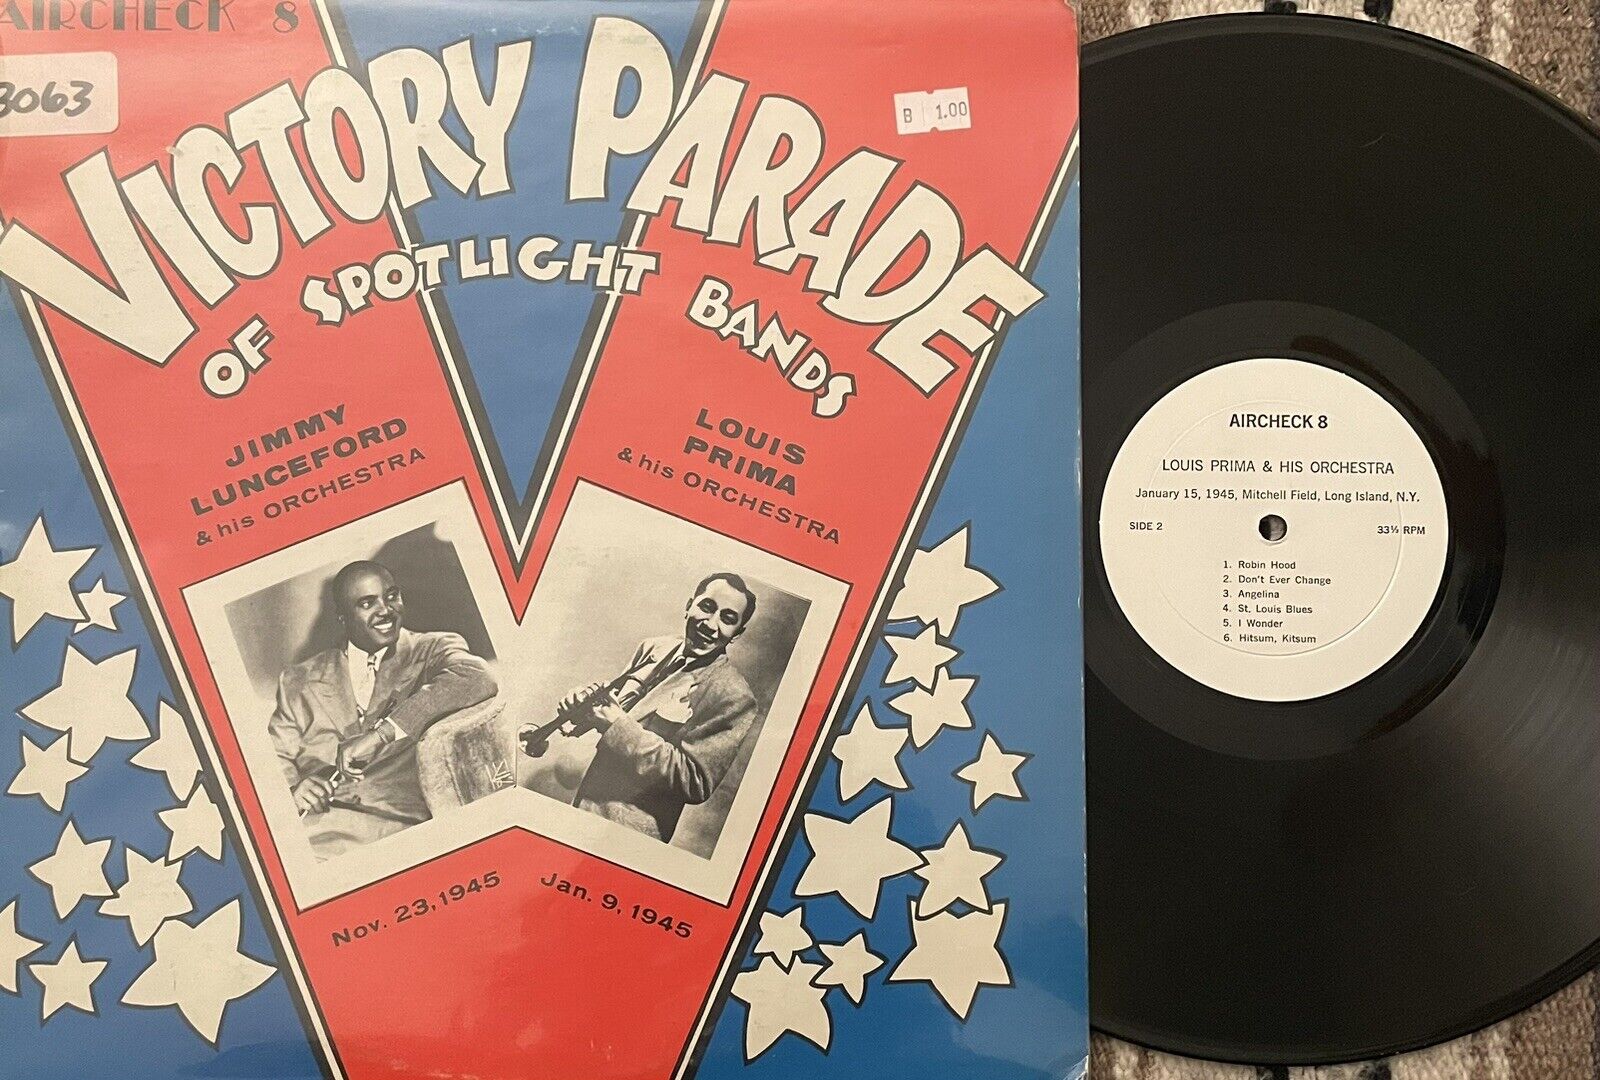 Jimmie Lunceford & Louis Prima – Victory Parade Of Spotlight Bands LP - RARE EX